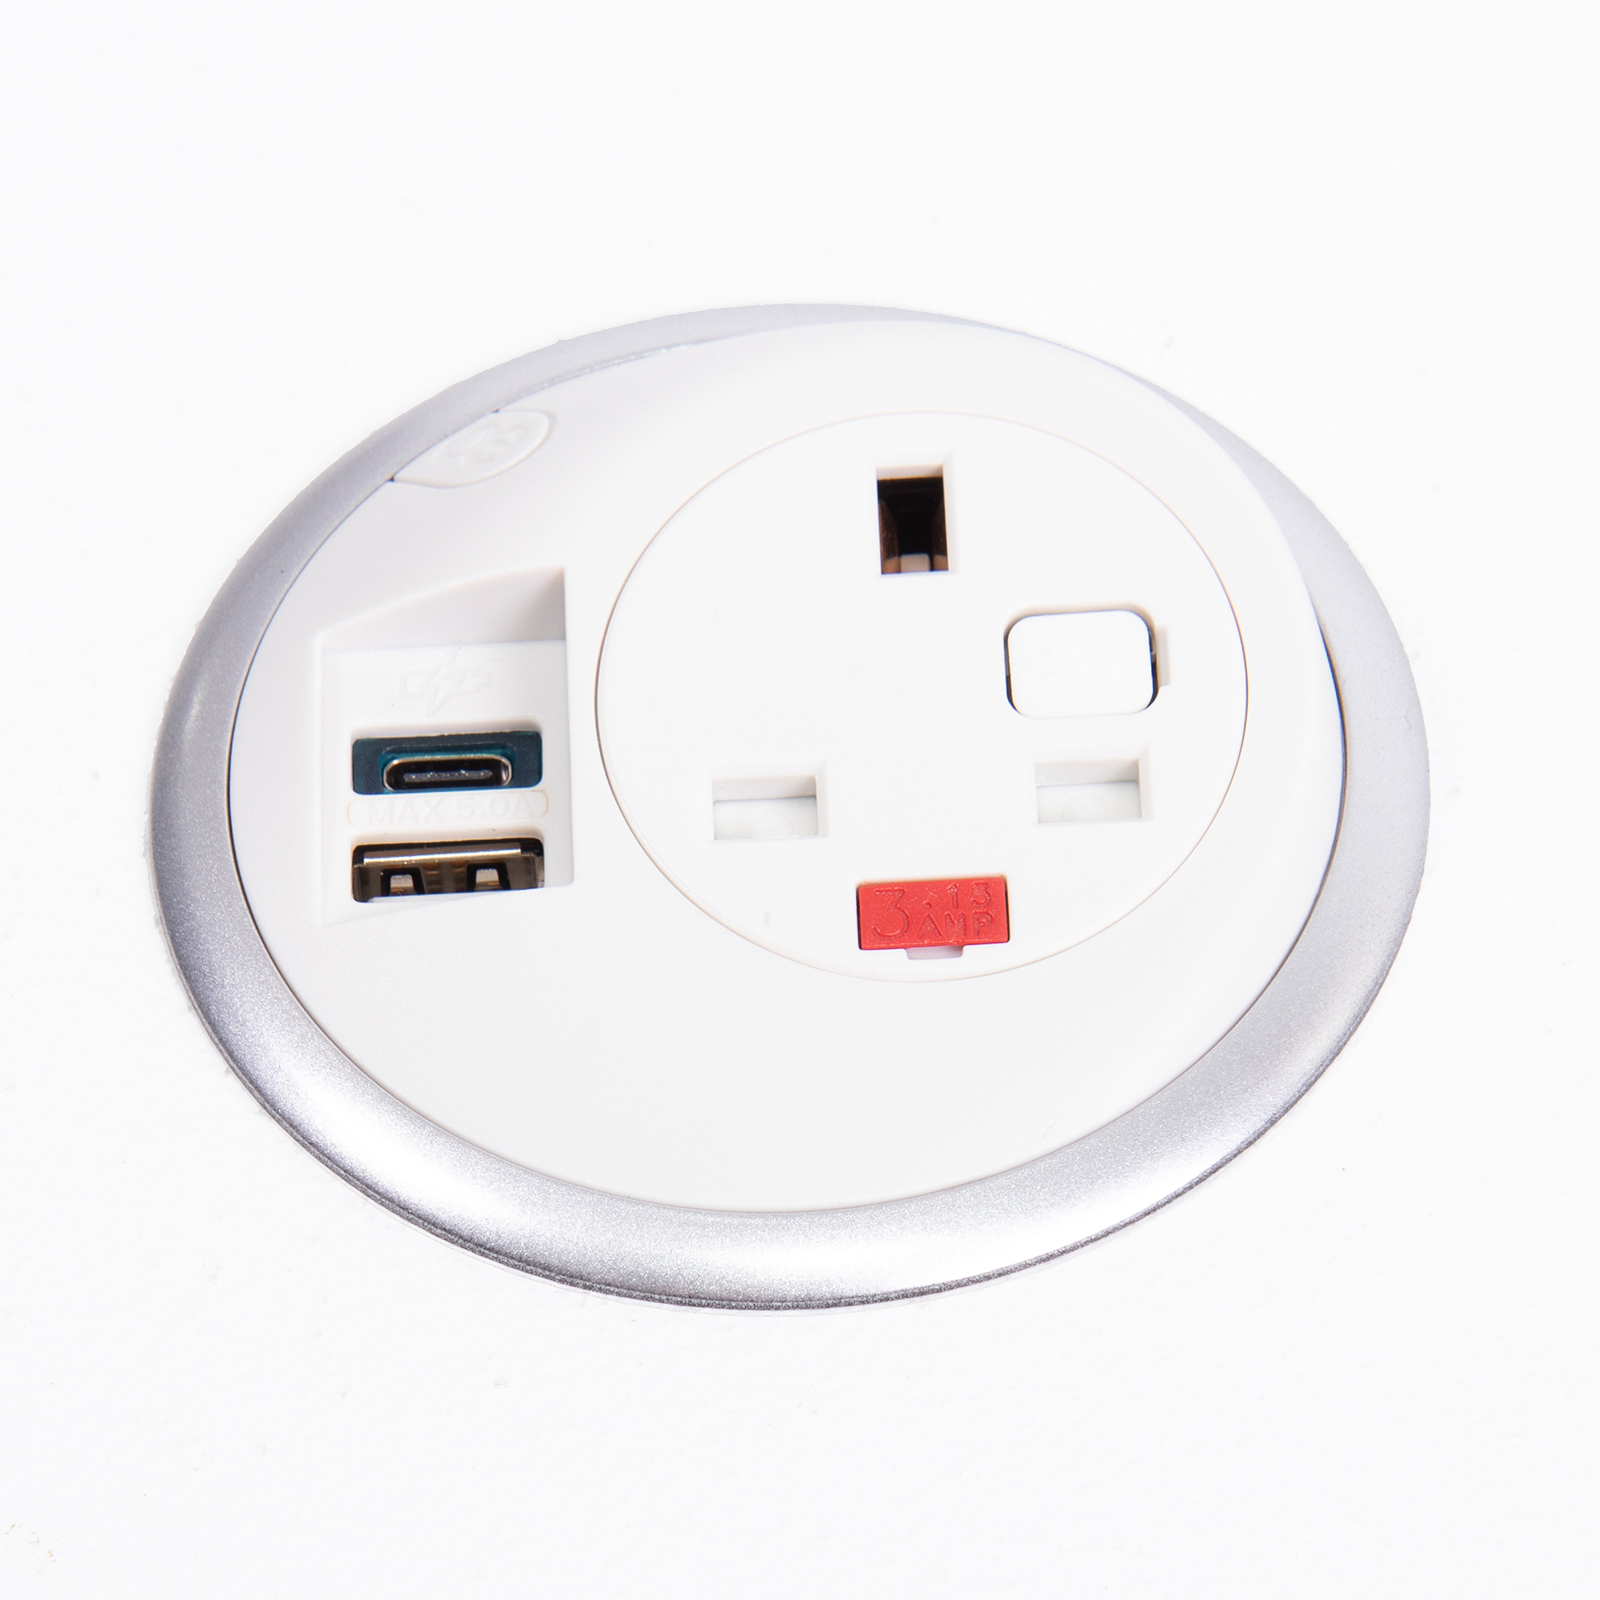 Plug Socket Pixel in-surface power module 1 x UK socket, 1 x TUF (A&C connectors) USB charger - white